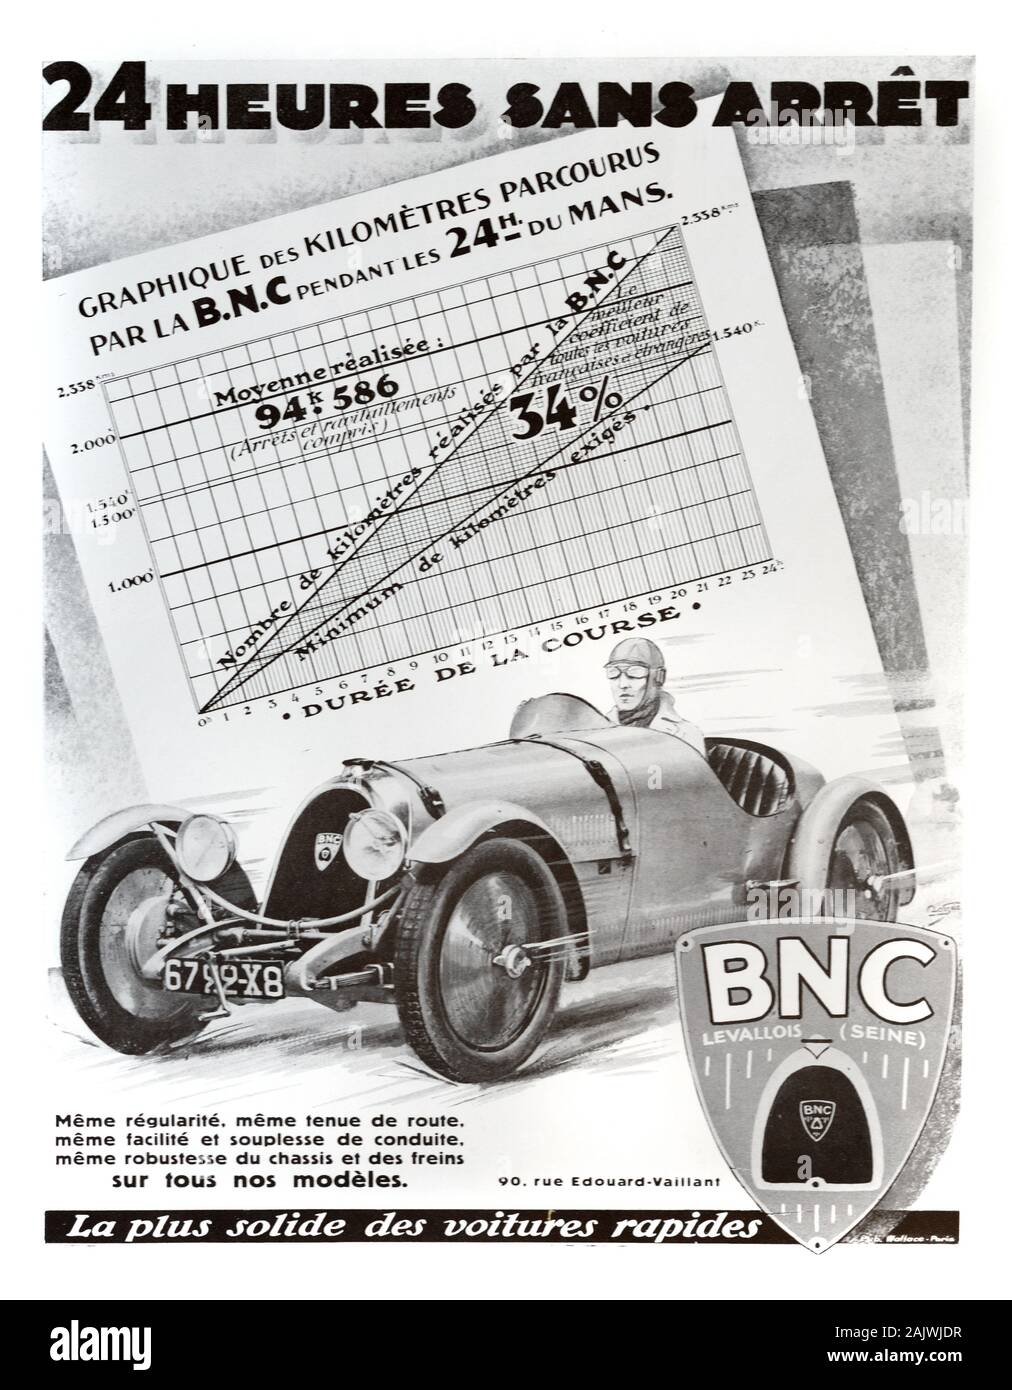 Vintage Advert, Old Advert or Publicity for Bollack Netter and Co or B.N.C Racing Car on the Circuit of 24 Hours of Le Mans Racing Track in 1928. Advert dated 1929 Stock Photo